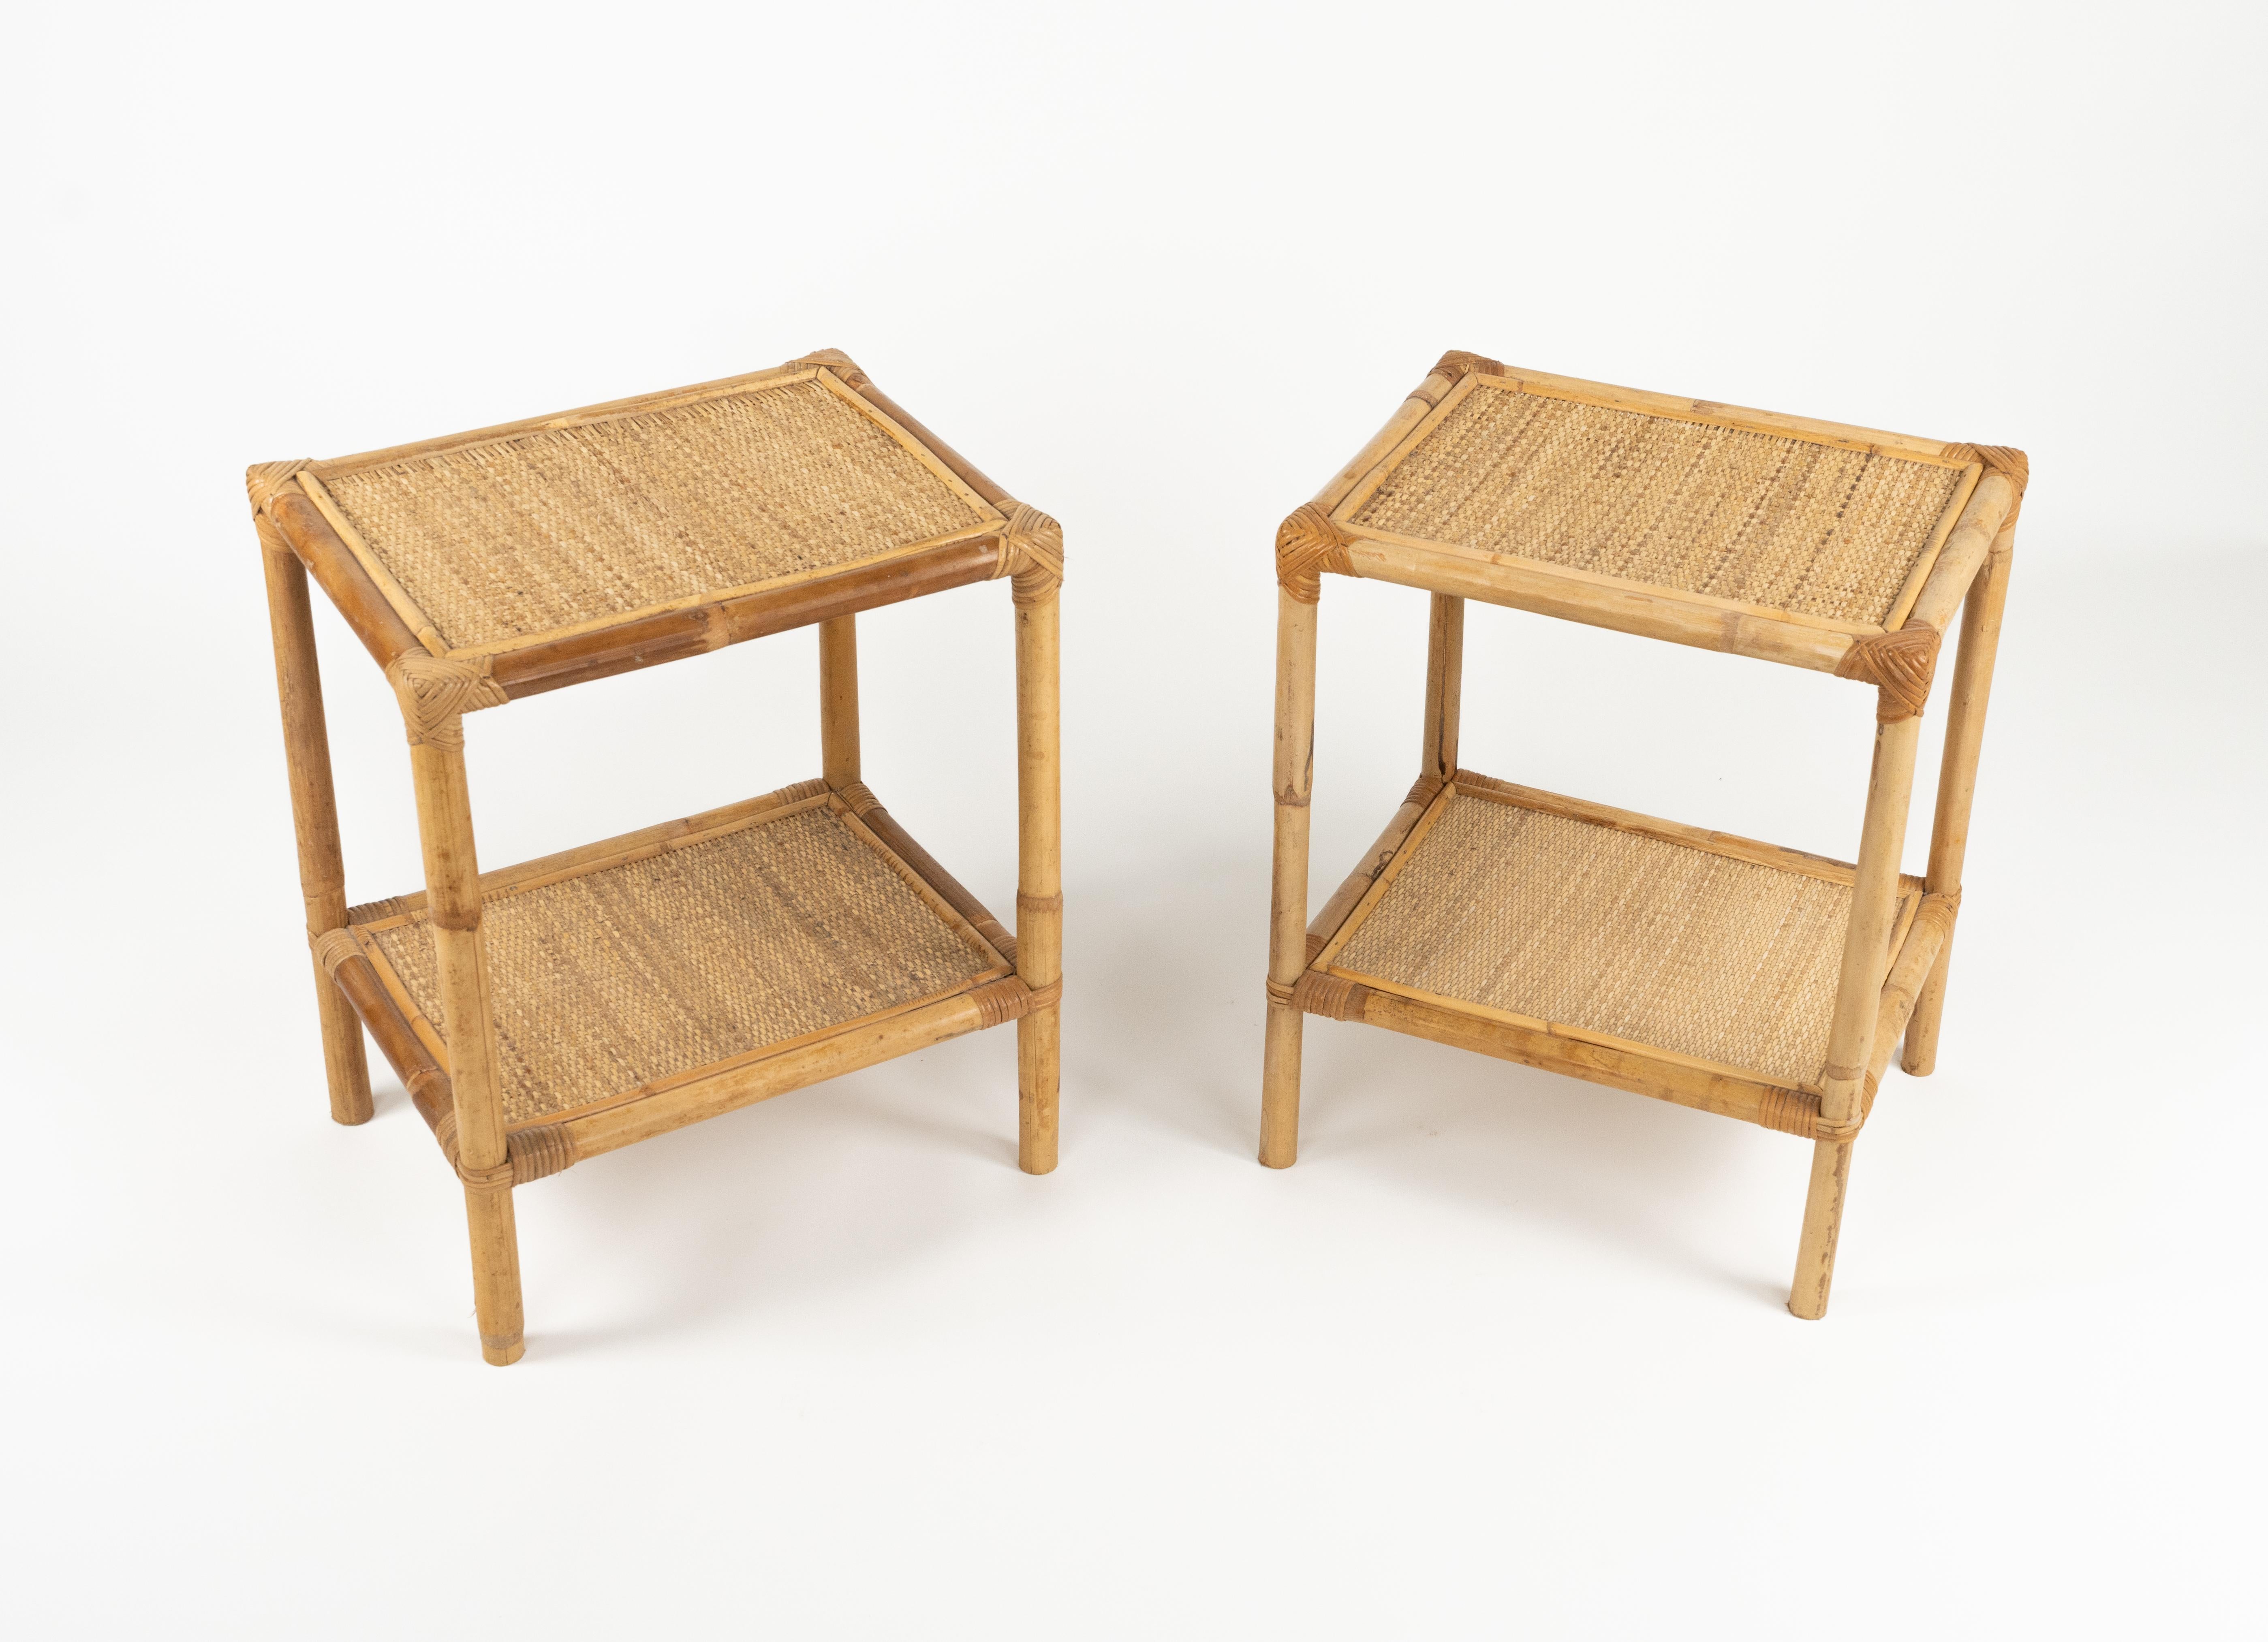 Italian Midcentury Pair of Bed Side Tables in Bamboo, Rattan & Wicker, Italy 1970s For Sale